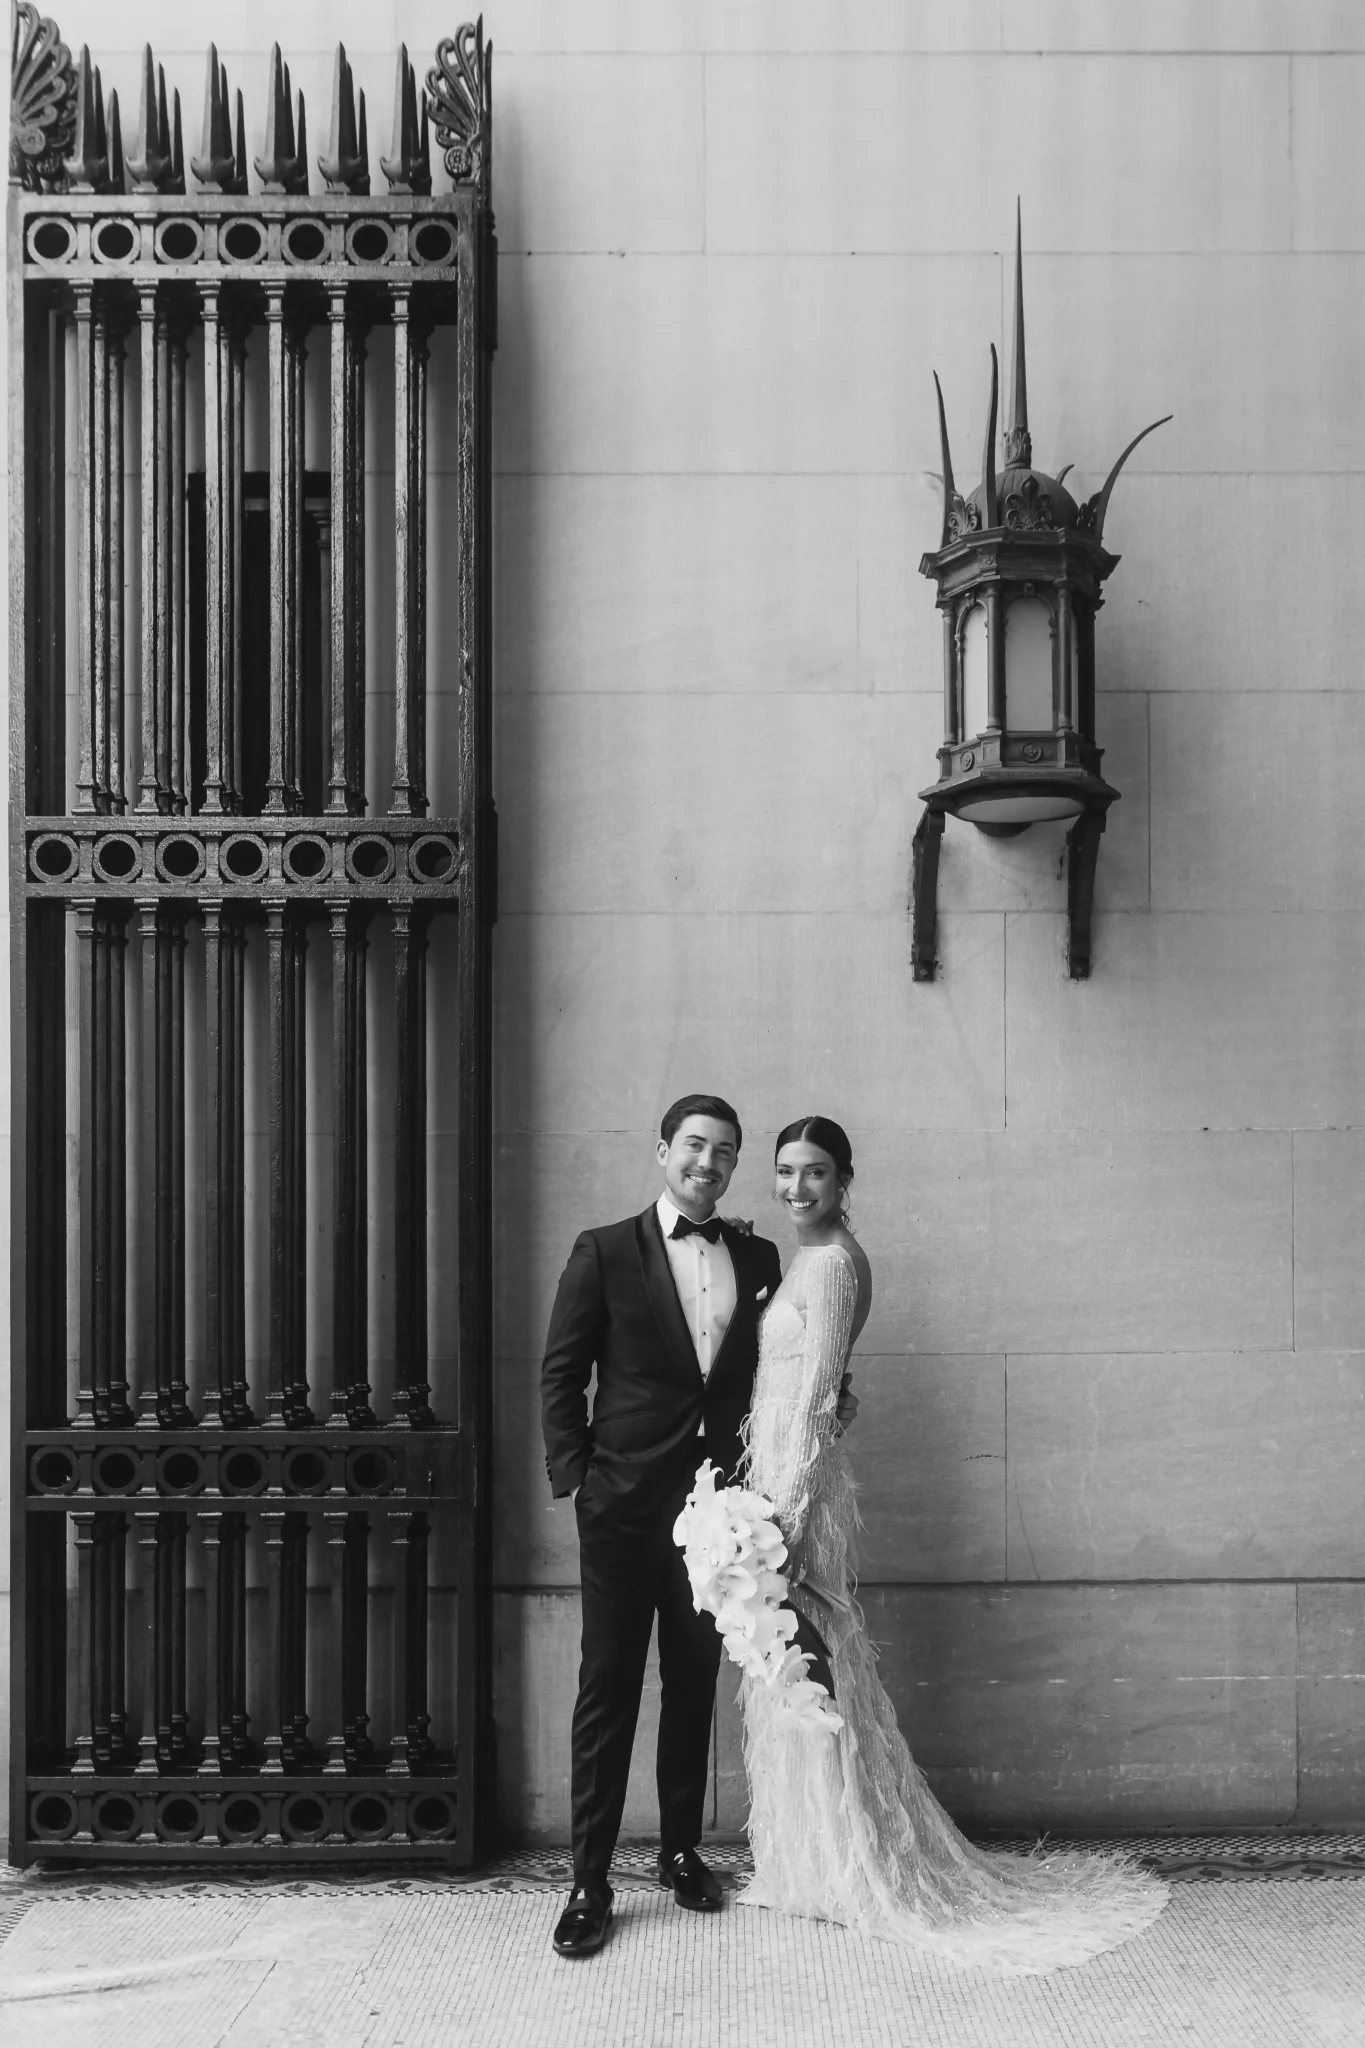 A bride and groom standing in front of an ornate door.